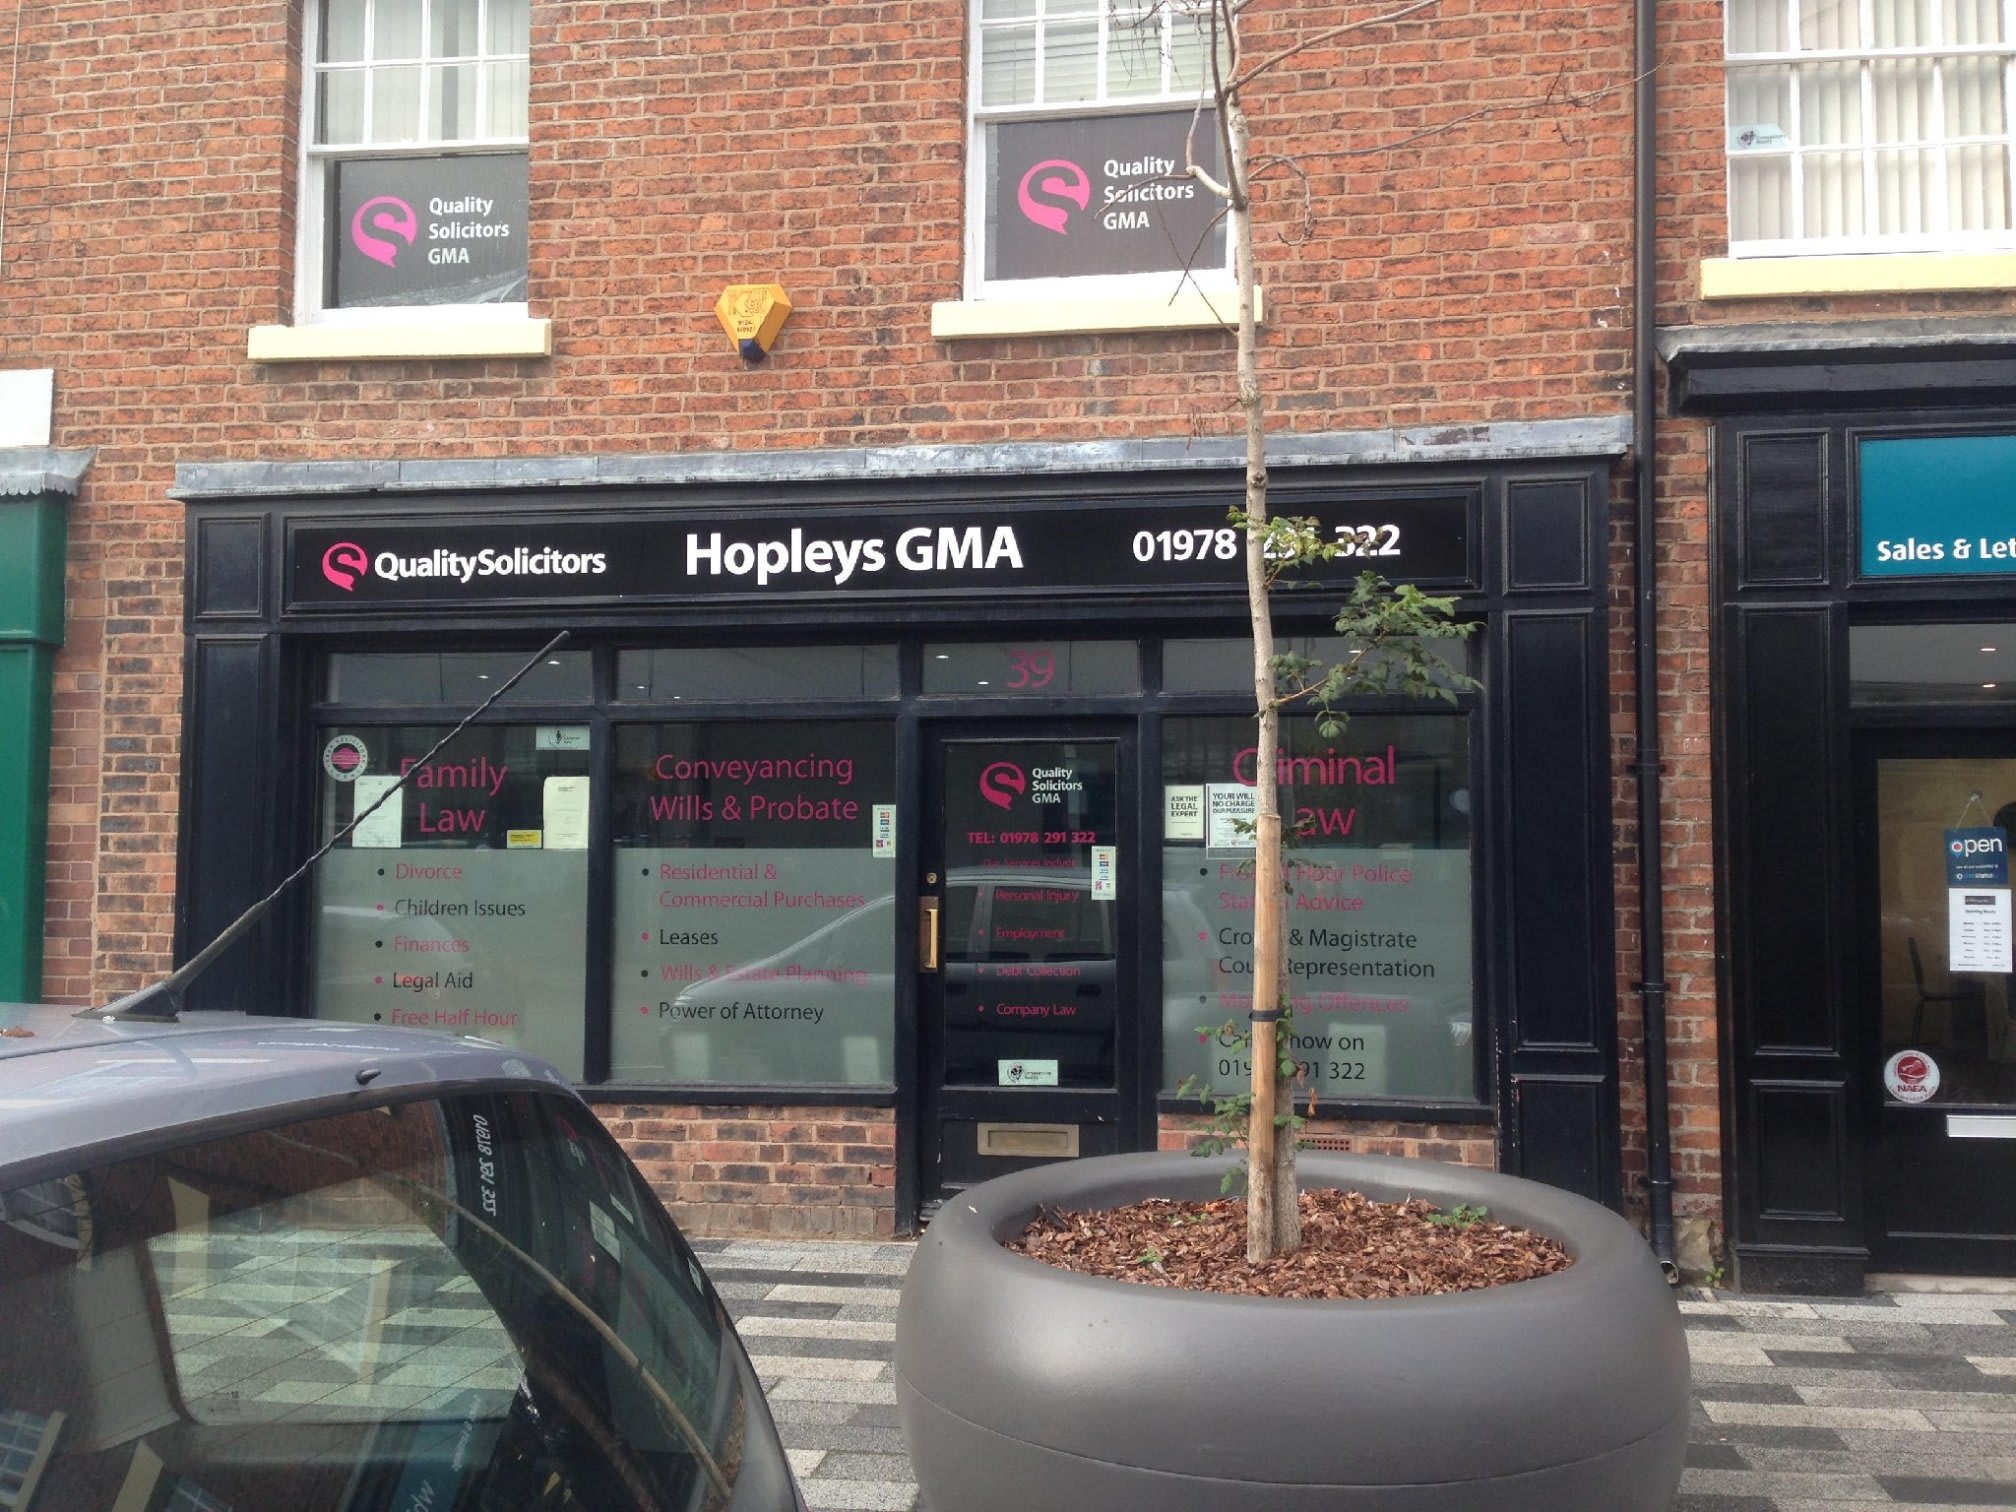 Hopleys GMA Incorporated Keene And Kelly (A QualitySolicitors Firm) | 39 King Street, Wrexham LL11 1HR | +44 1978 291322